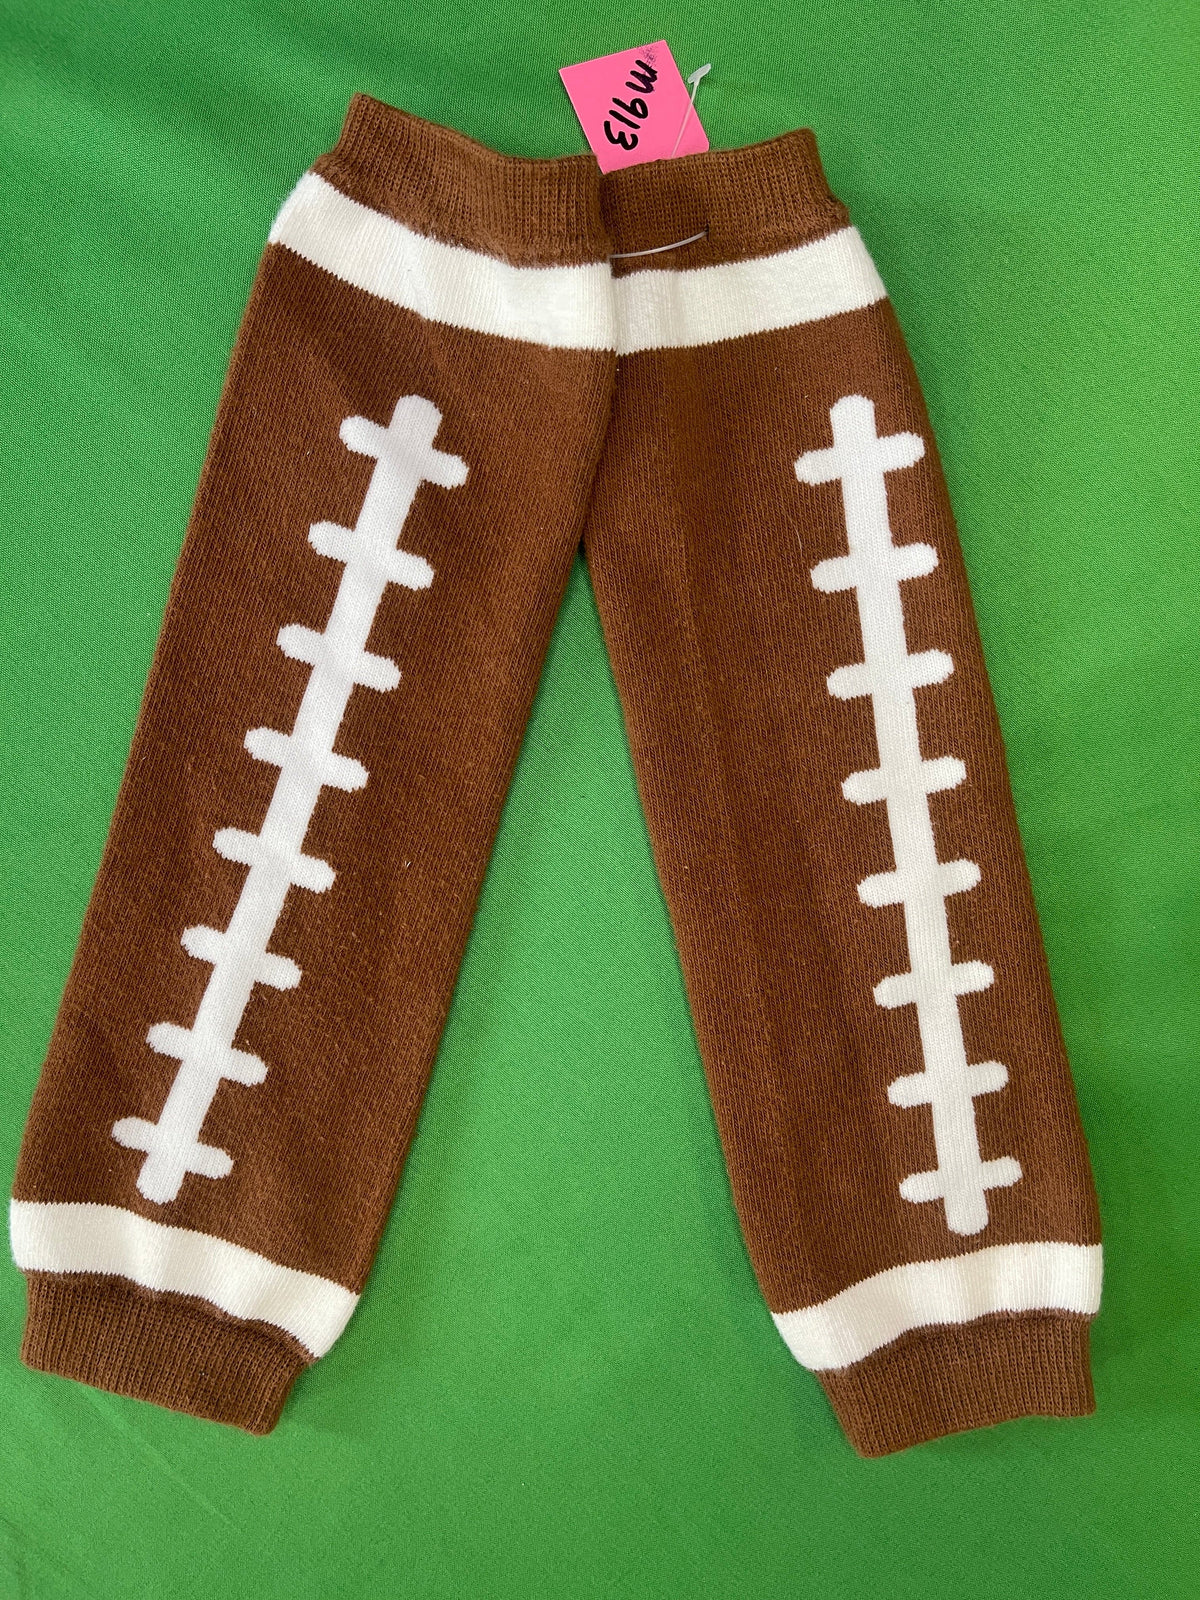 American Football Leg Warmers/Strong Arms Youth X-Small